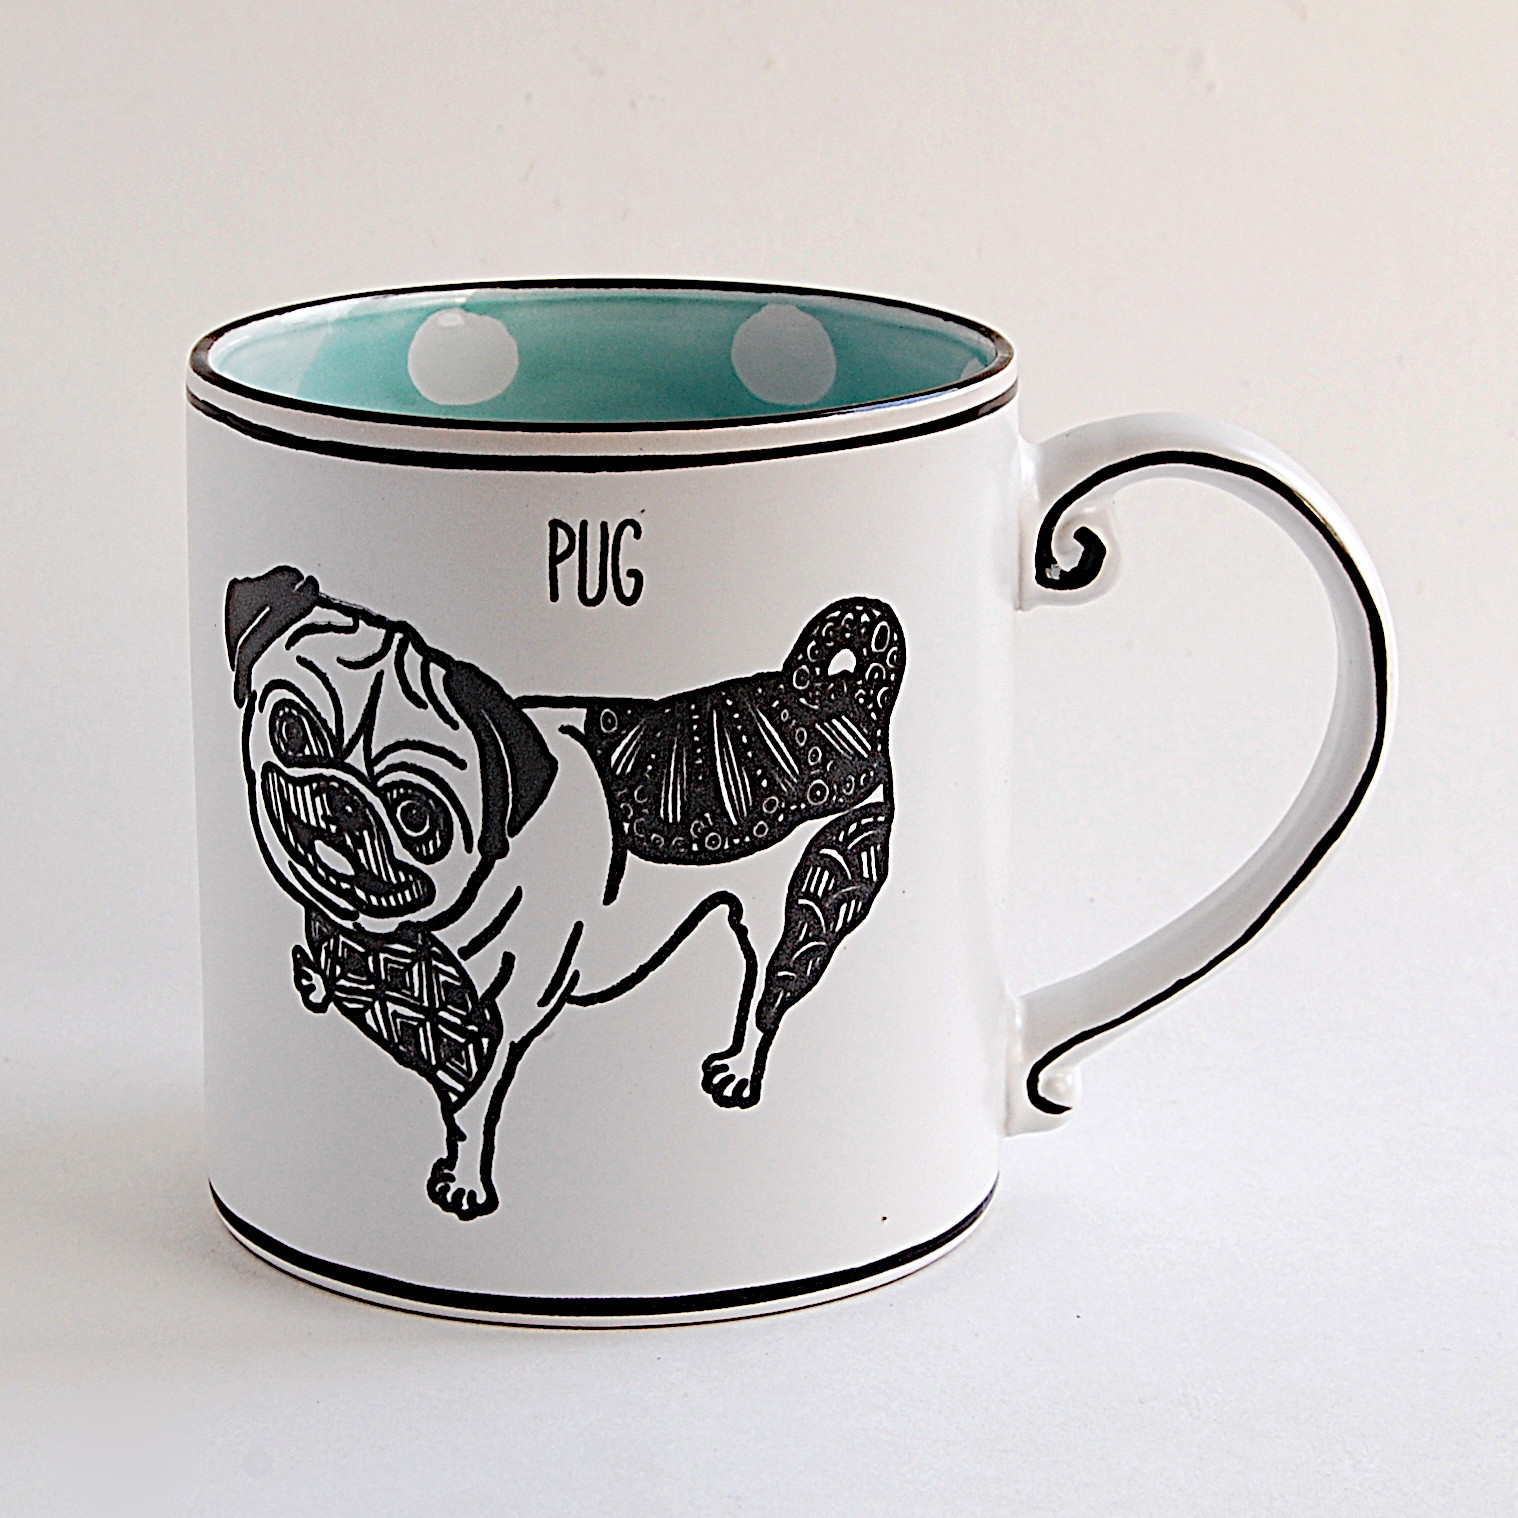 This Pug Dog Ceramic Coffee Mug Beverage Cup 21oz by Blue Sky Kitchen Home Décor is made with love by Premier Homegoods! Shop more unique gift ideas today with Spots Initiatives, the best way to support creators.